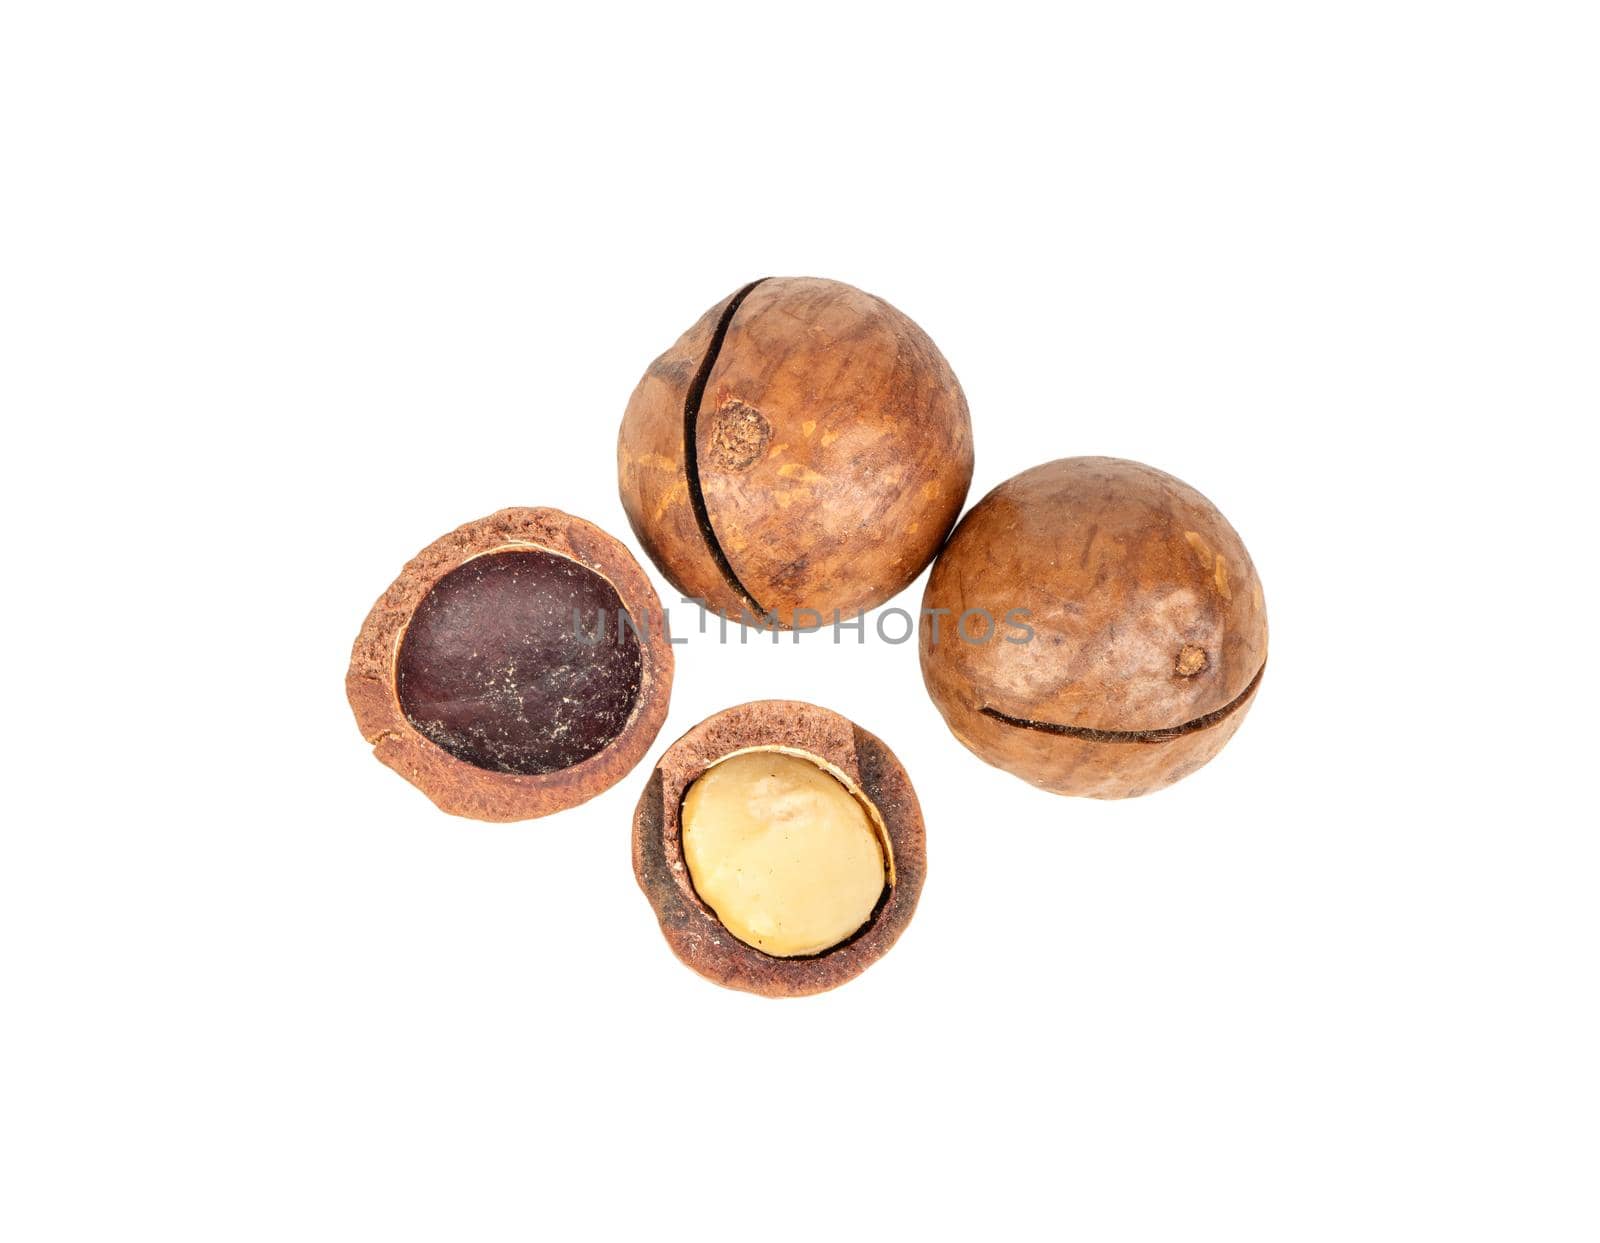 Macadamia nuts with a split half on a white background, top view